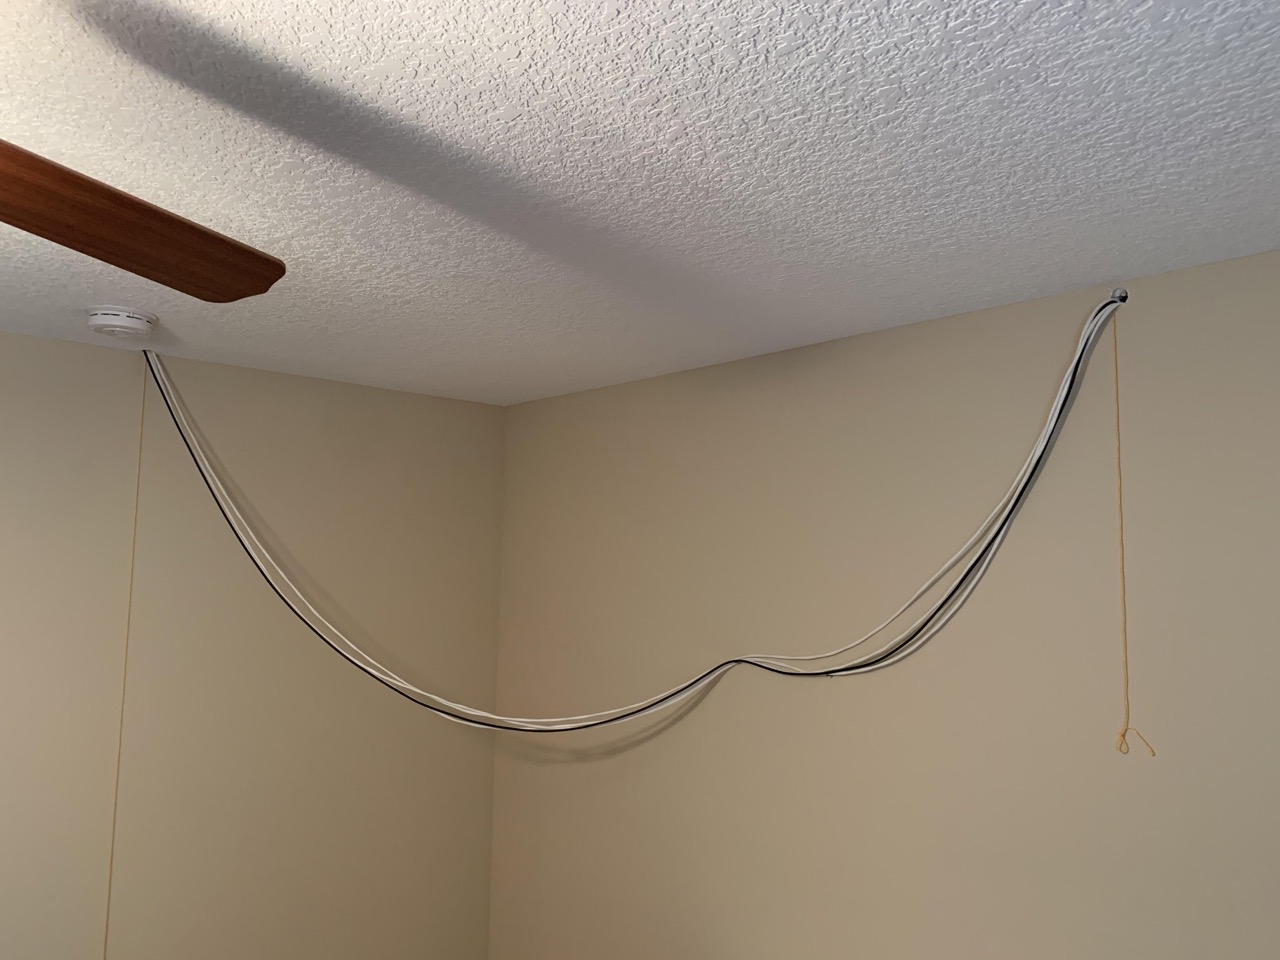 How To Hide Electrical Wires On Ceiling | Storables